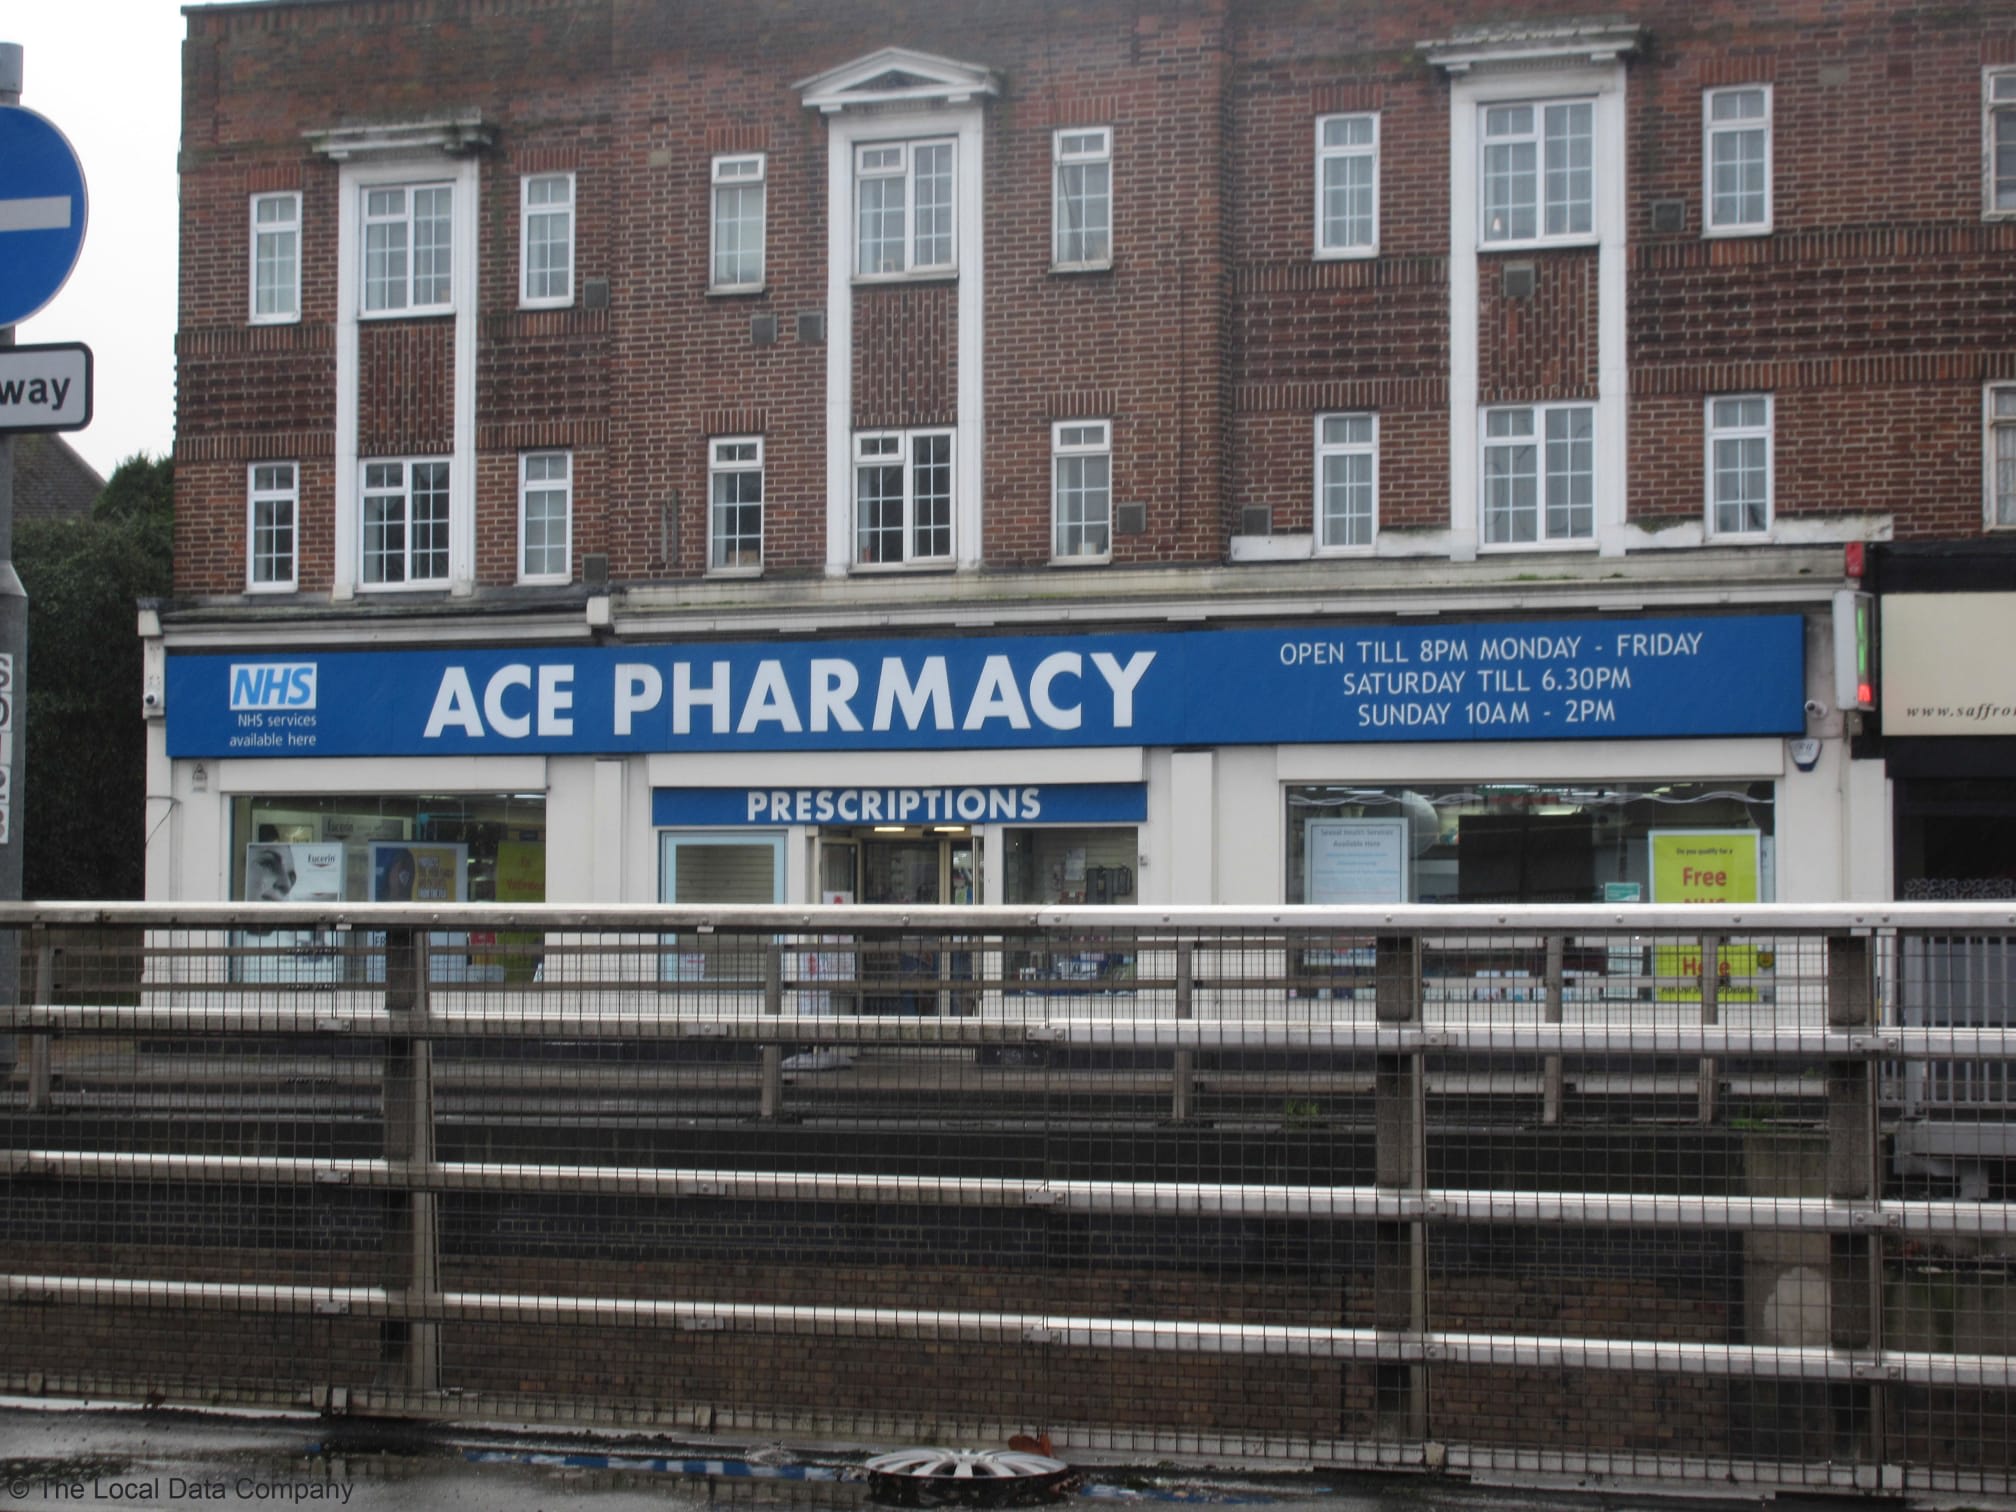 Images Ace Pharmacy